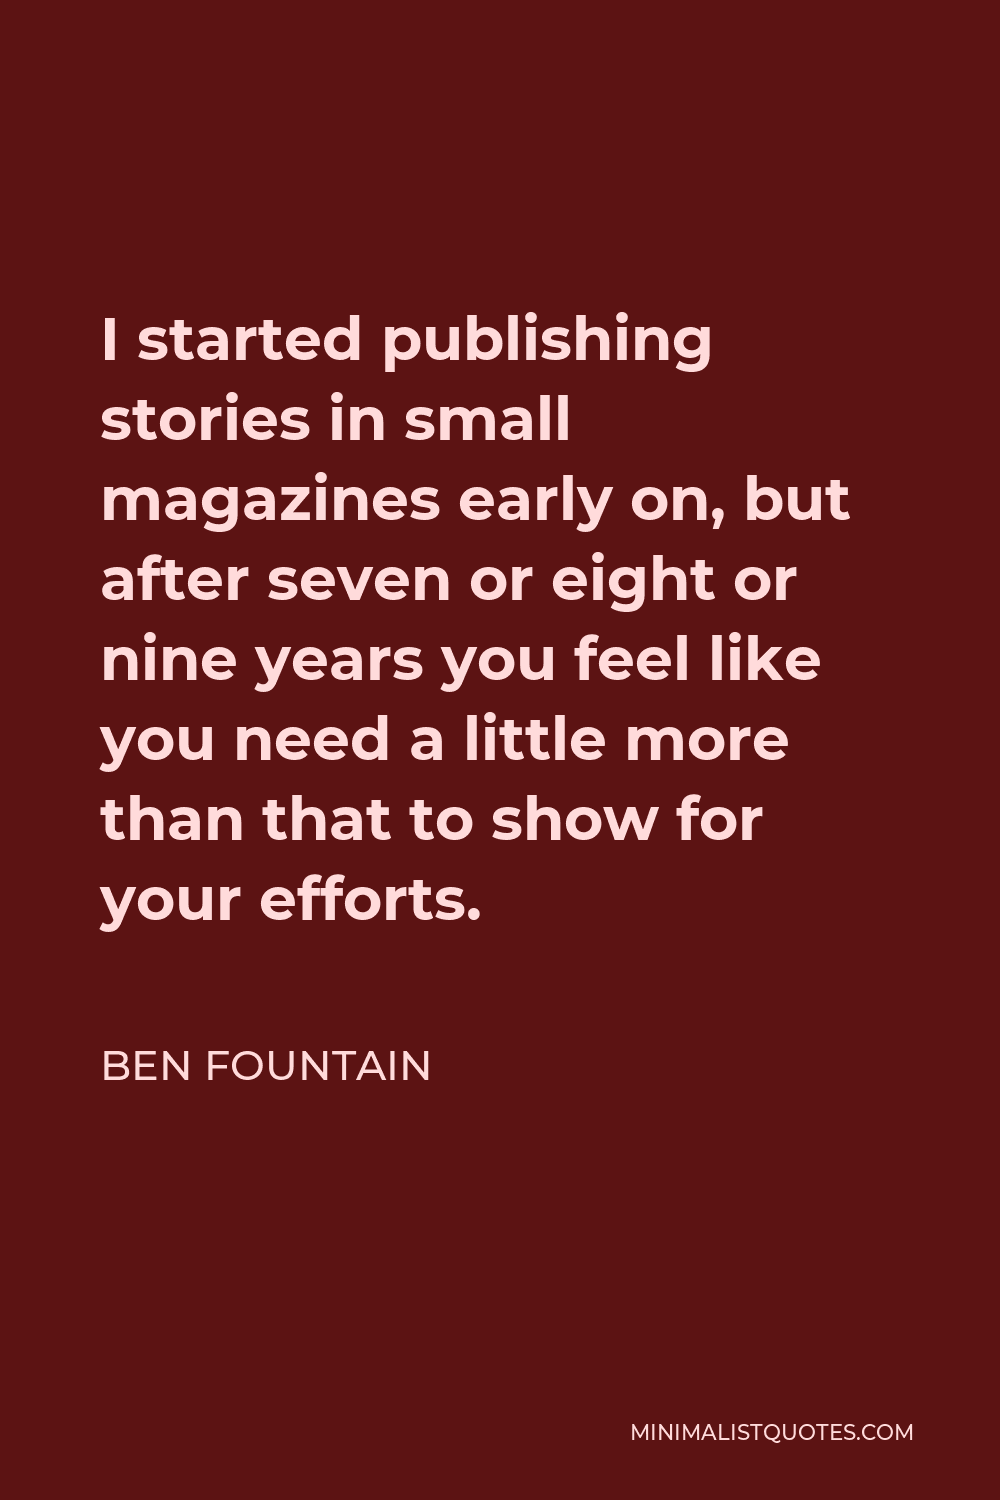 Ben Fountain Quote - I started publishing stories in small magazines early on, but after seven or eight or nine years you feel like you need a little more than that to show for your efforts.